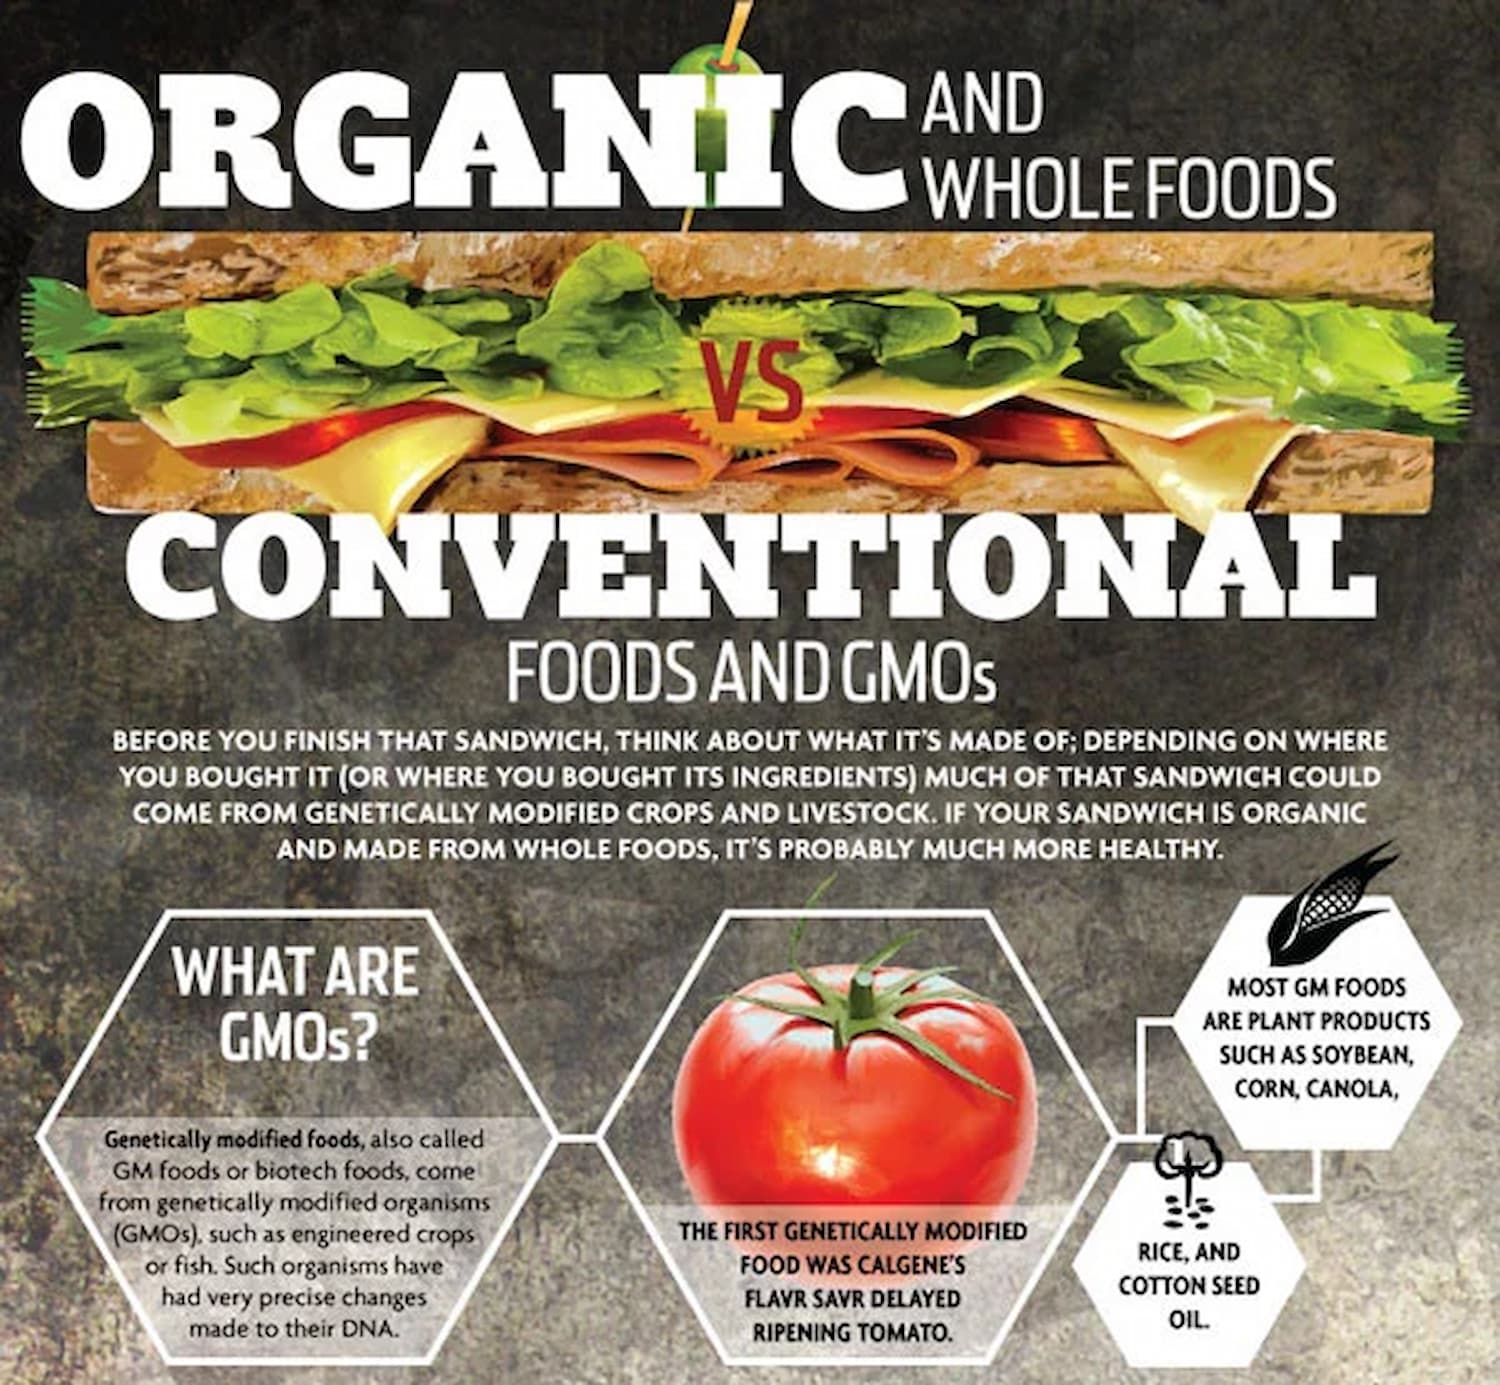 What's the difference between organic foods and conventional foods?